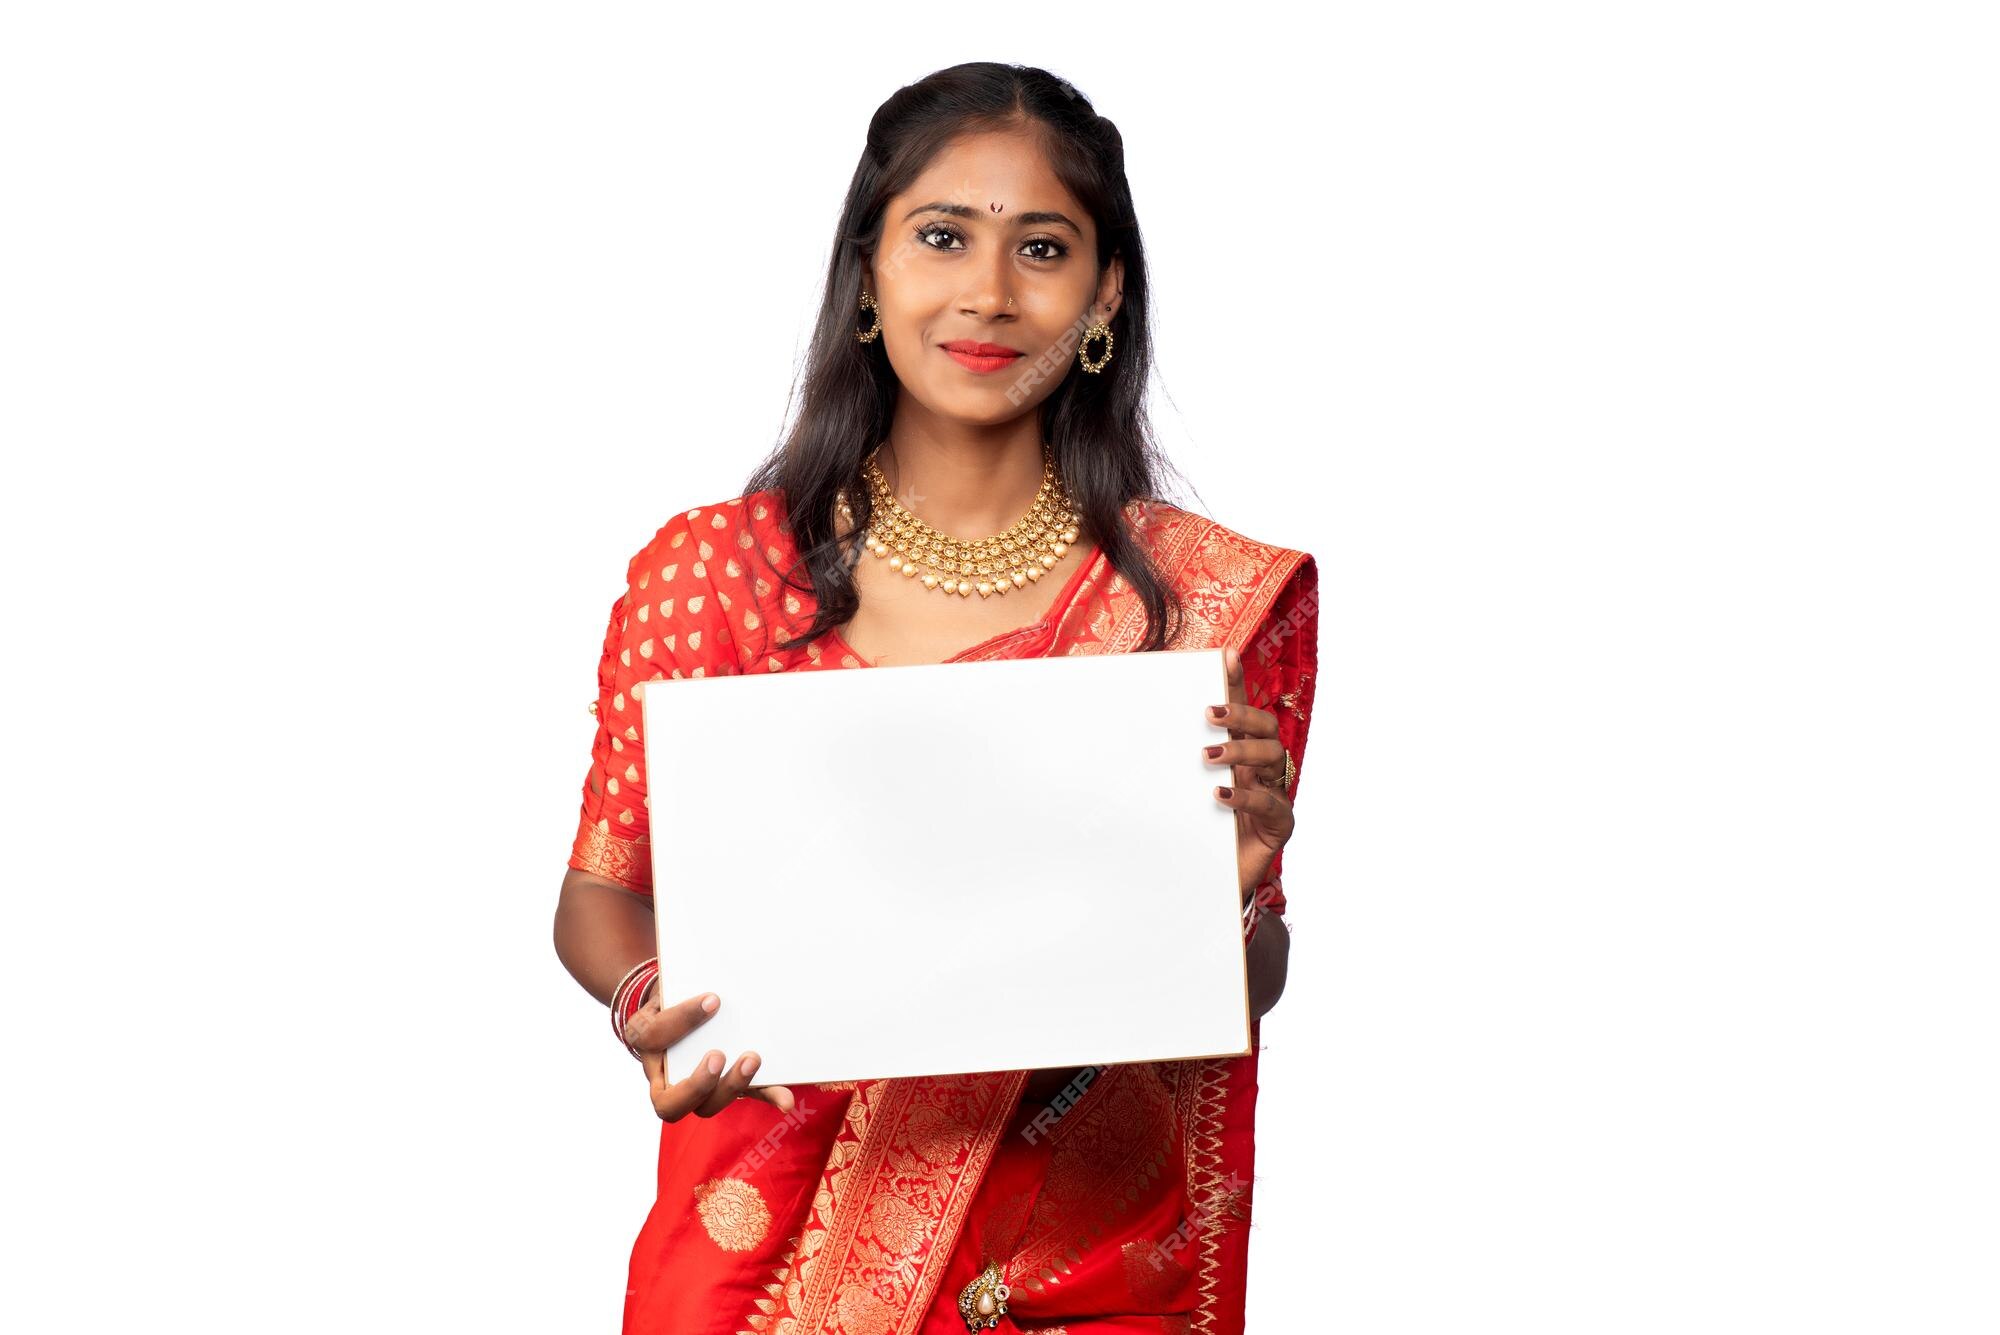 Premium Photo | A young girl or businesswoman wearing a saree and holding a  signboard in her hands on a white background